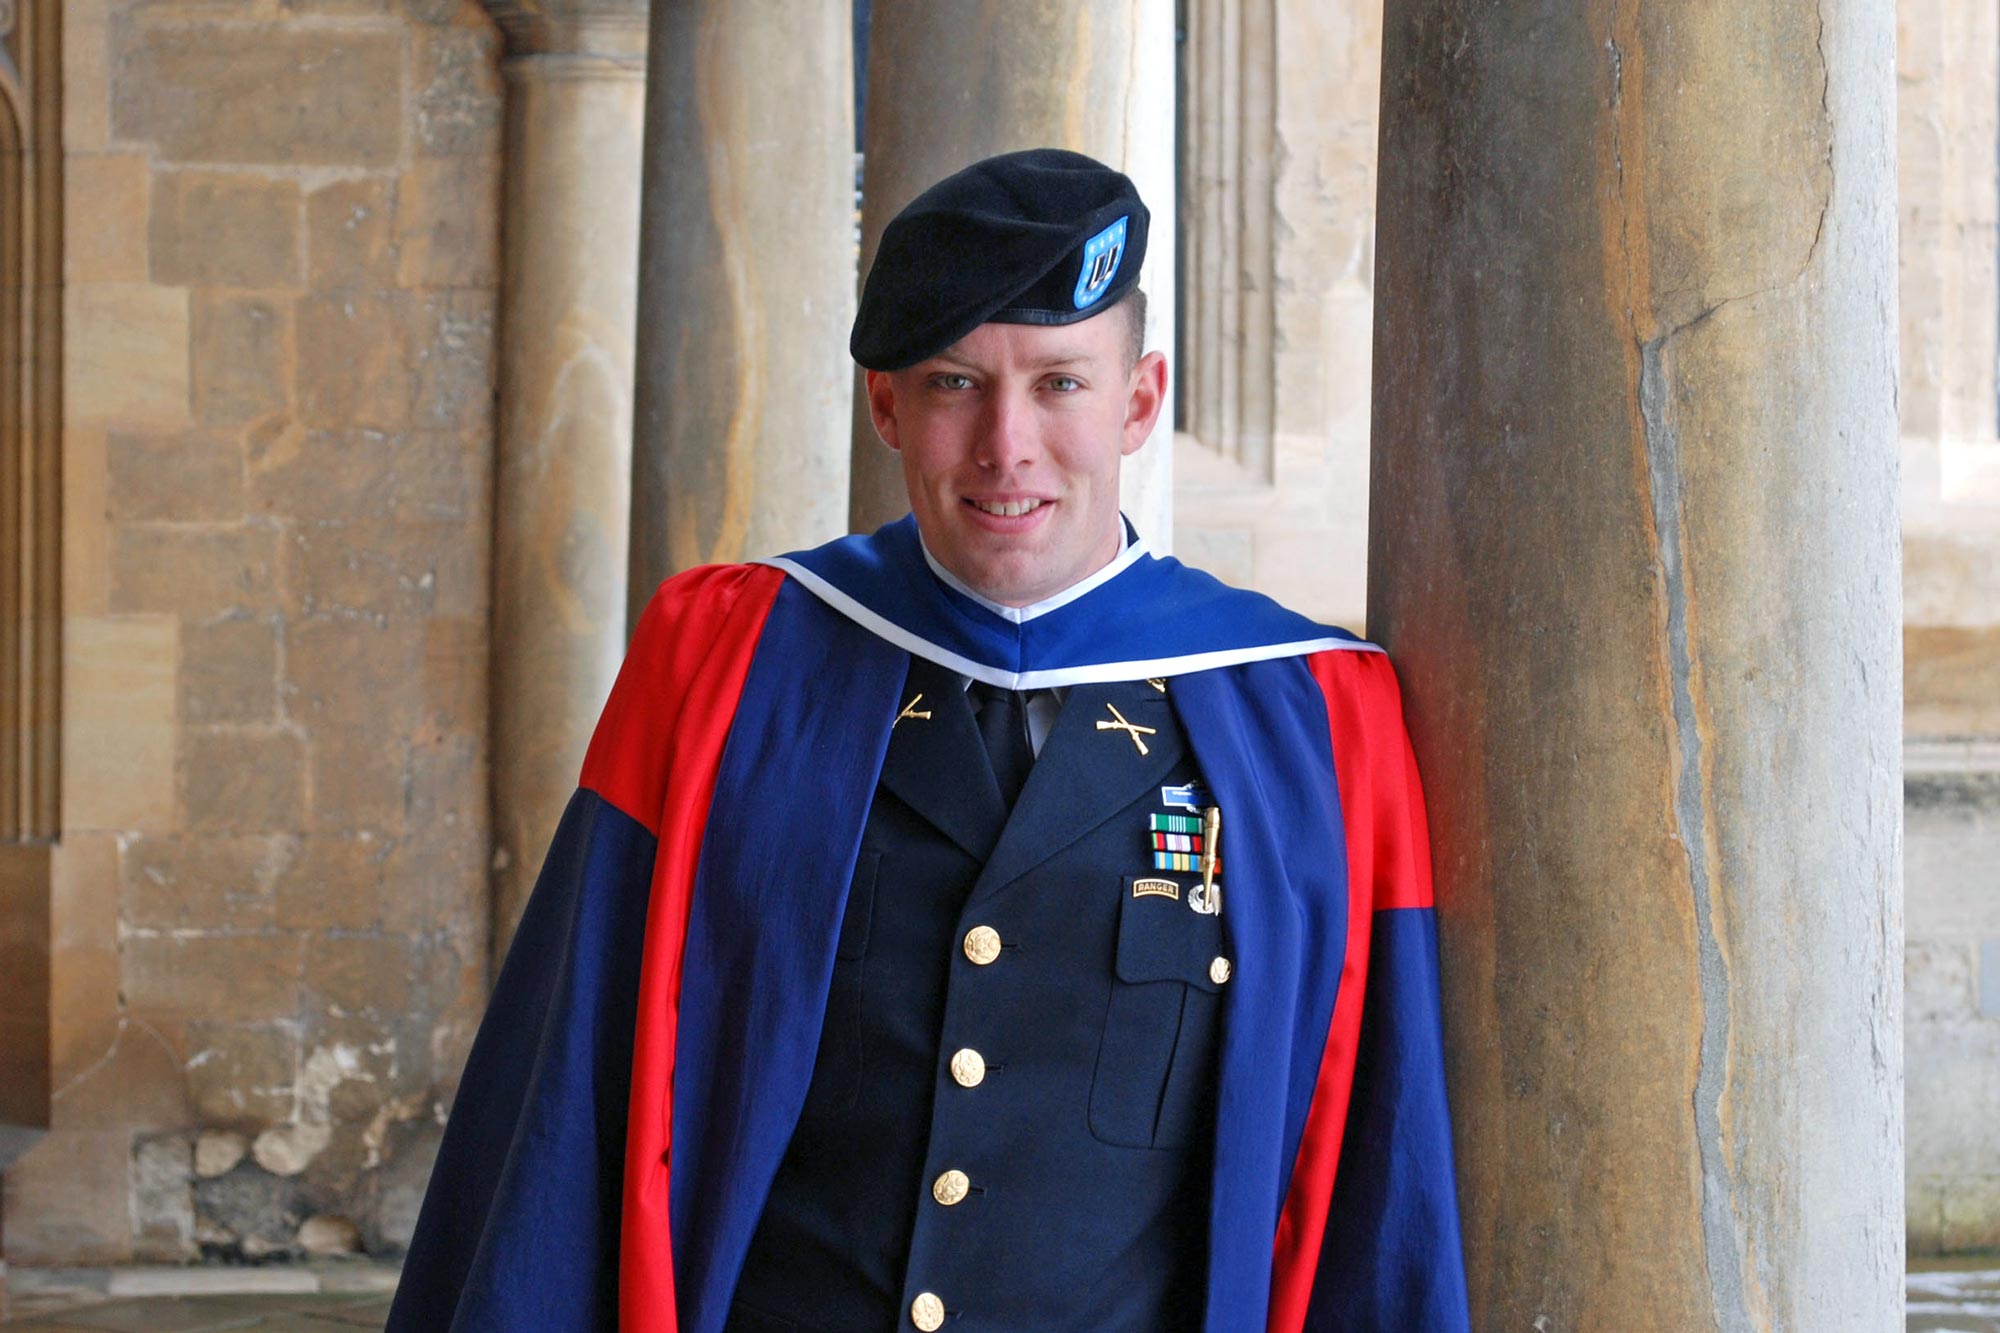 Joe Riley dressed in his military uniform next to a column